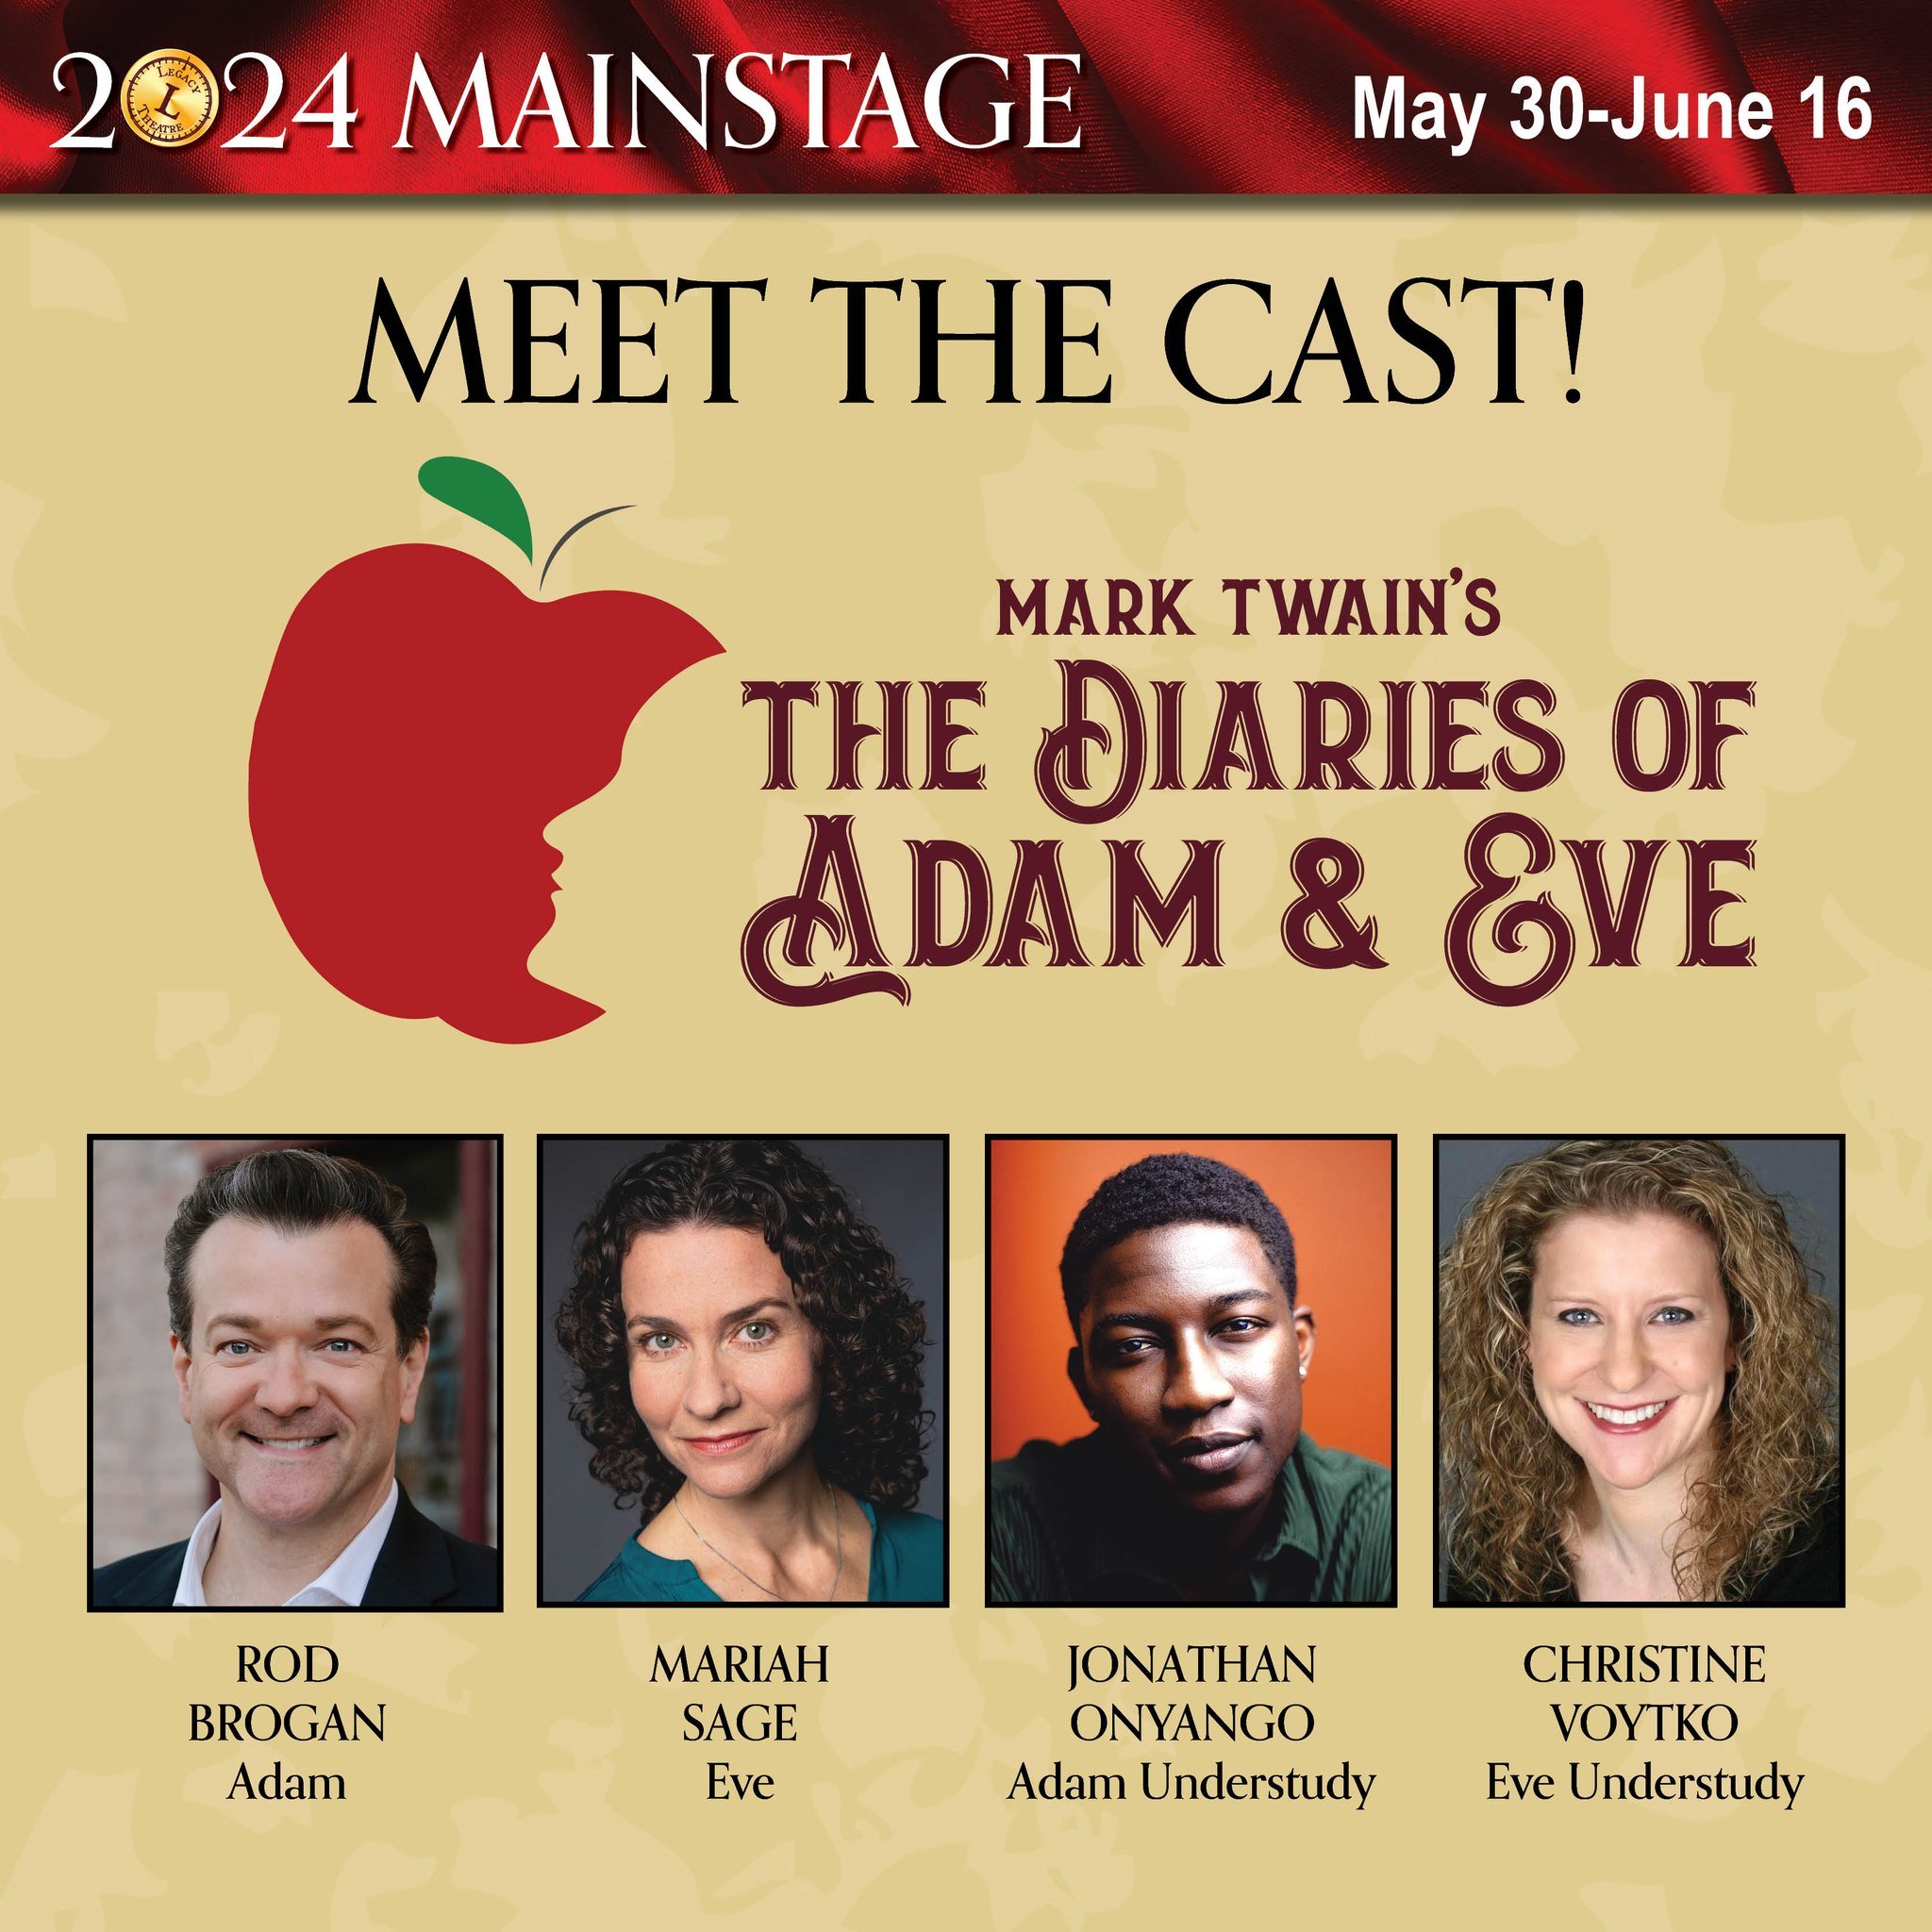 We are so pleased to officially introduce the cast of &quot;Mark Twain's The Diaries of Adam and Eve&rdquo; at Legacy! Single tickets are on sale now &ndash; join us May 30-June 16 for this entertaining adaptation of Twain&rsquo;s classic piece. 

ht